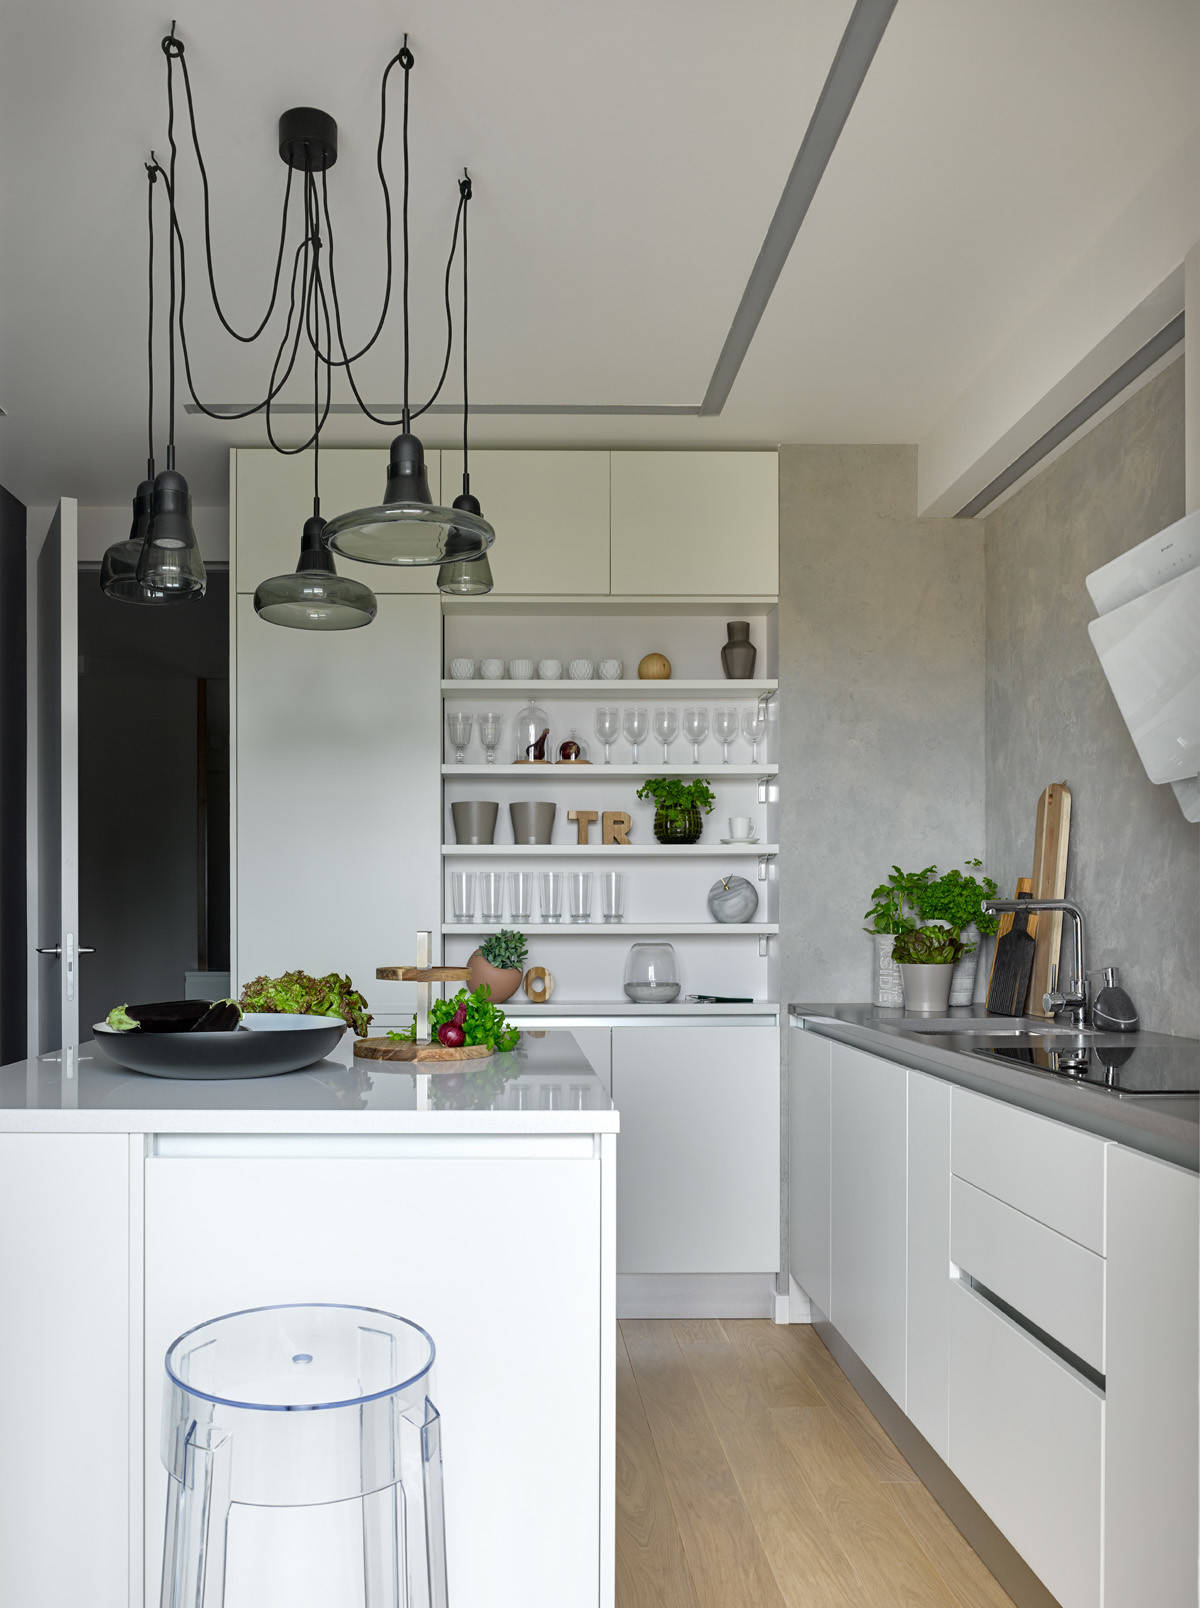 Creative Storage Solutions for Small Kitchens - wit & whimsy